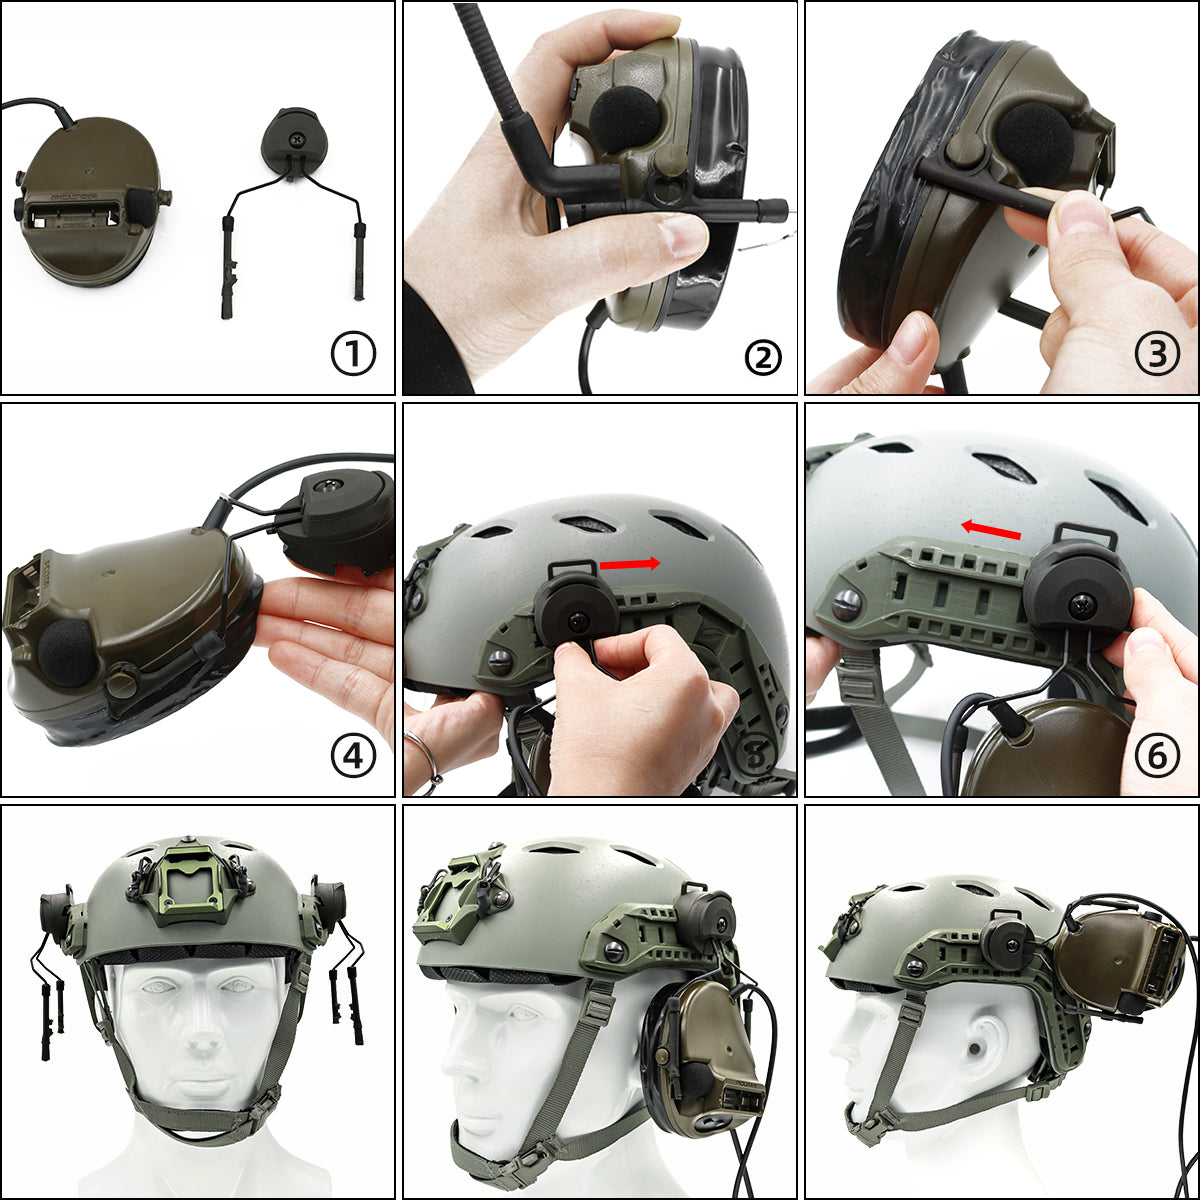 TAC-SKY C3 Tactical Headset Helmet Fast Rail Version with kenwoodPTT Silicone Earmuffs Noise Reduction